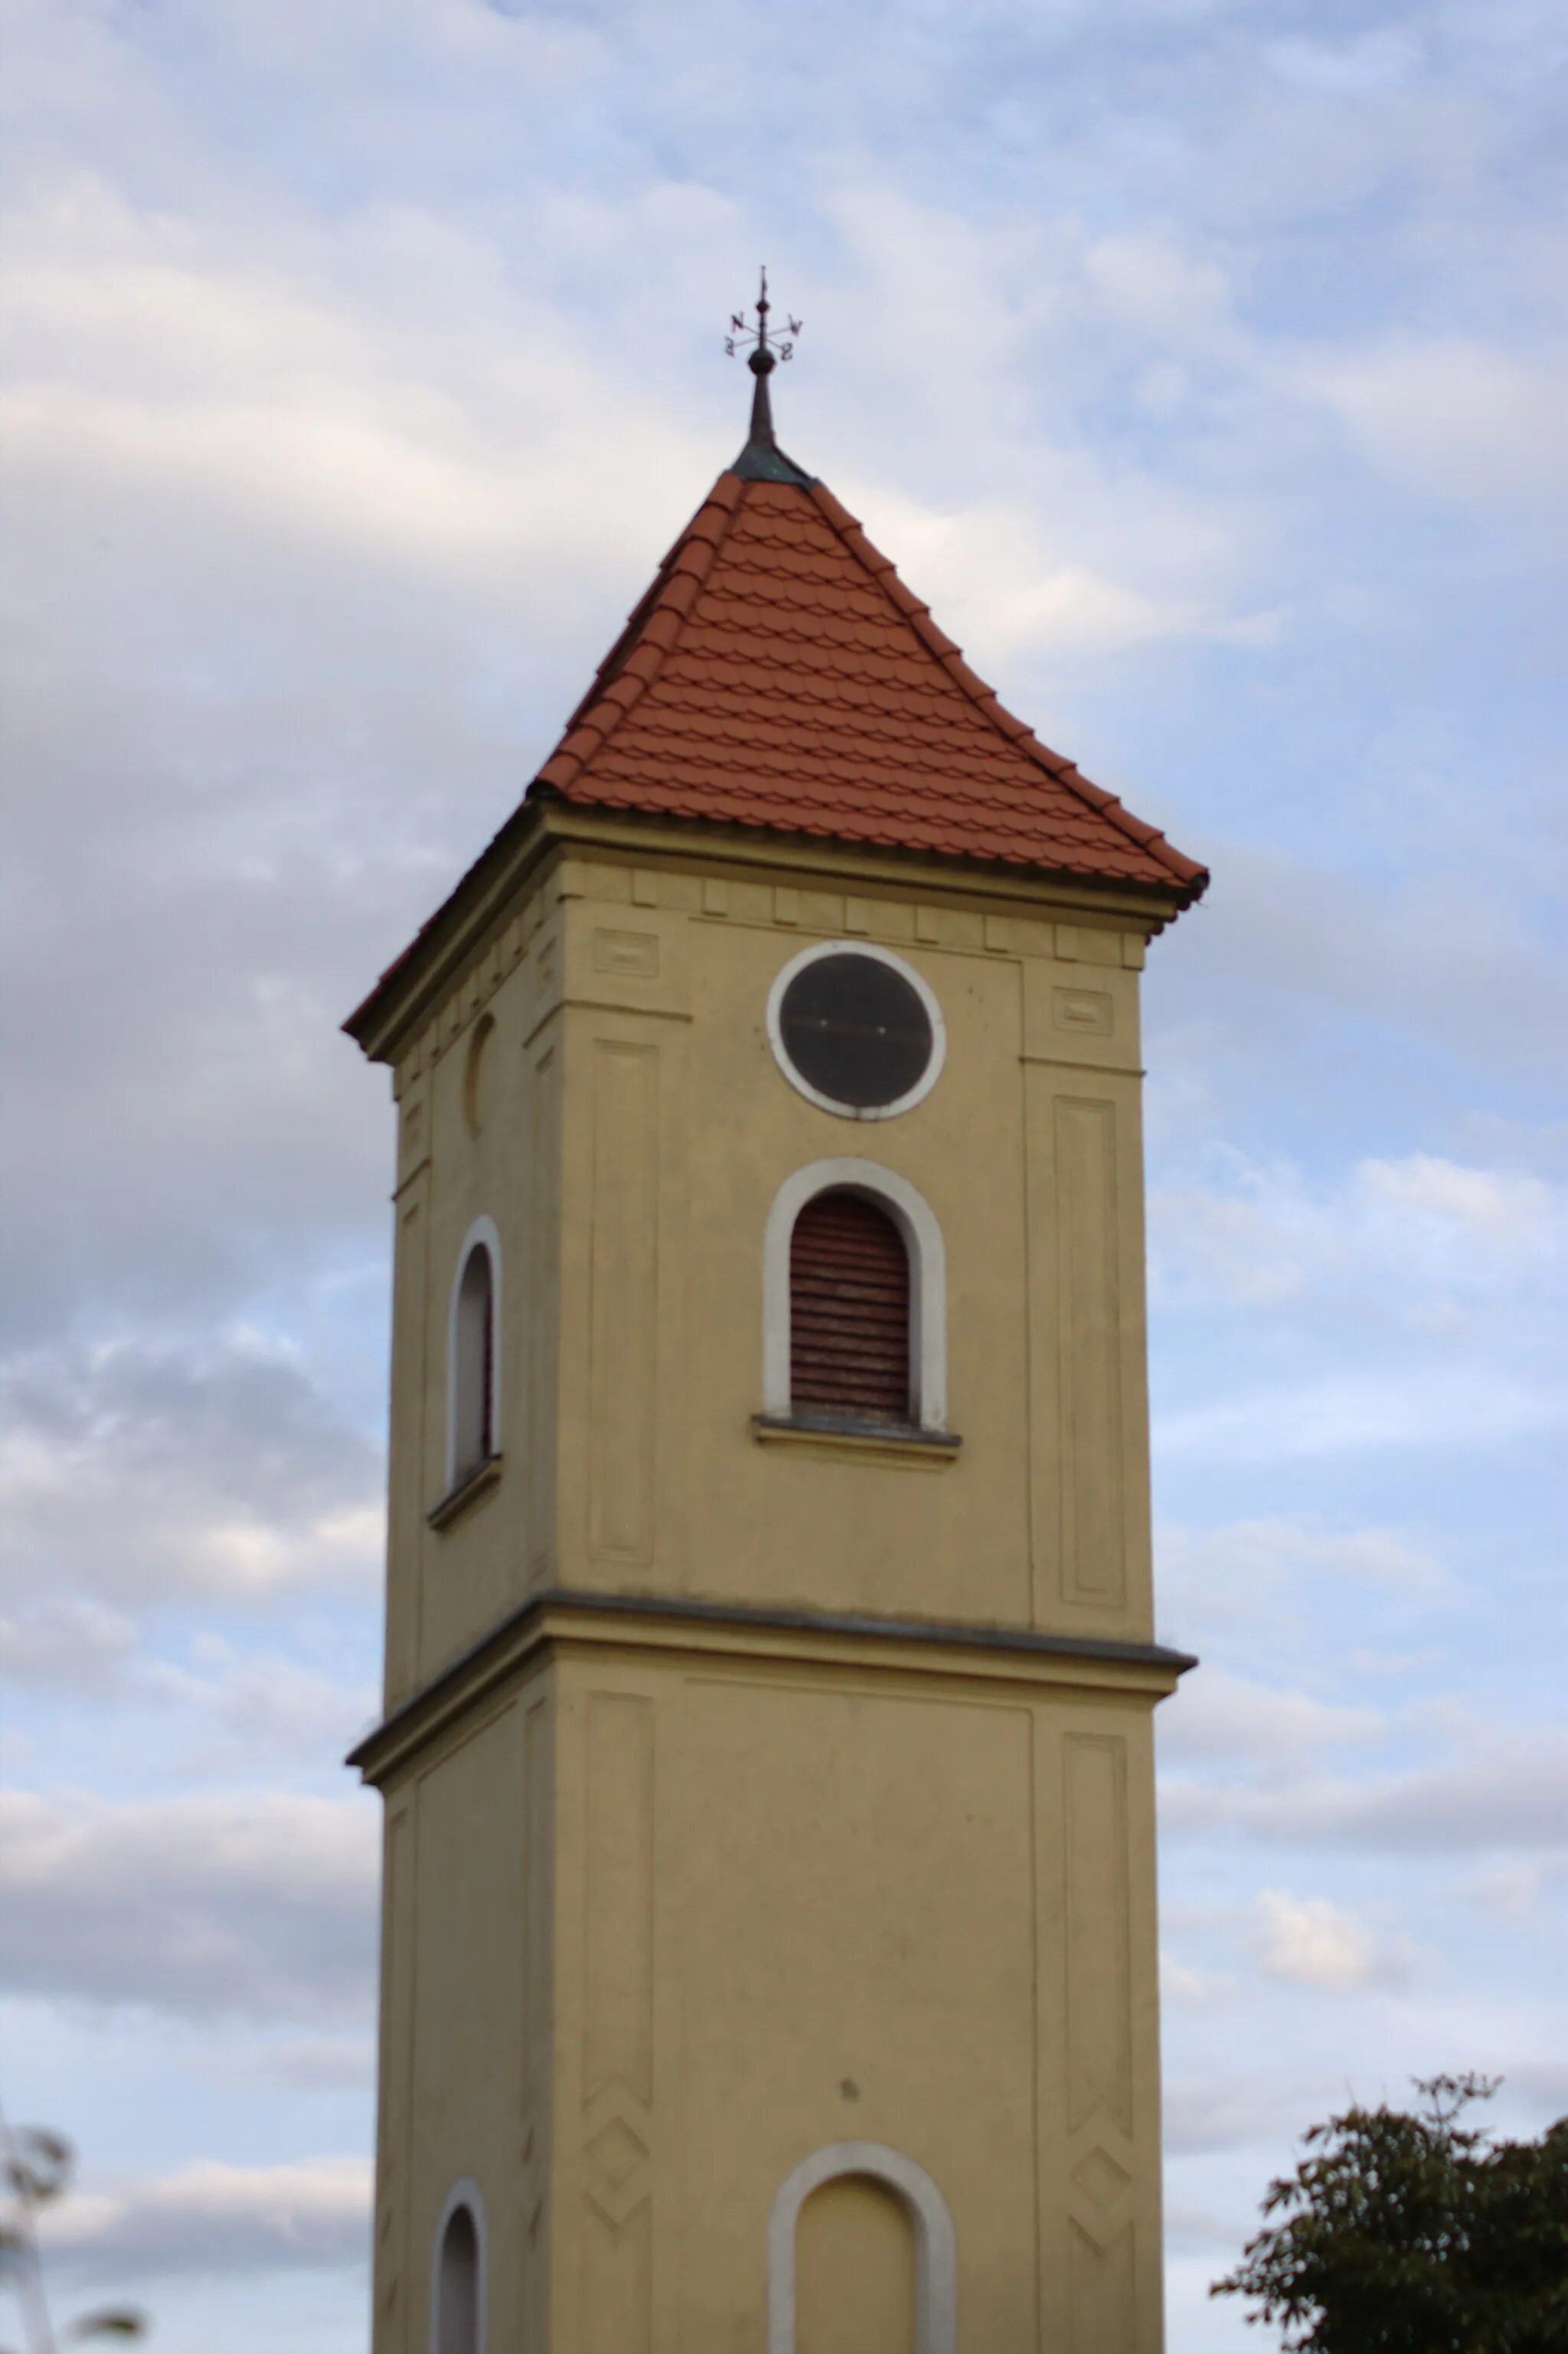 Photo showing: Most likely a bell tower in the village of Piekary, South Silesian Voivodeship, Poland